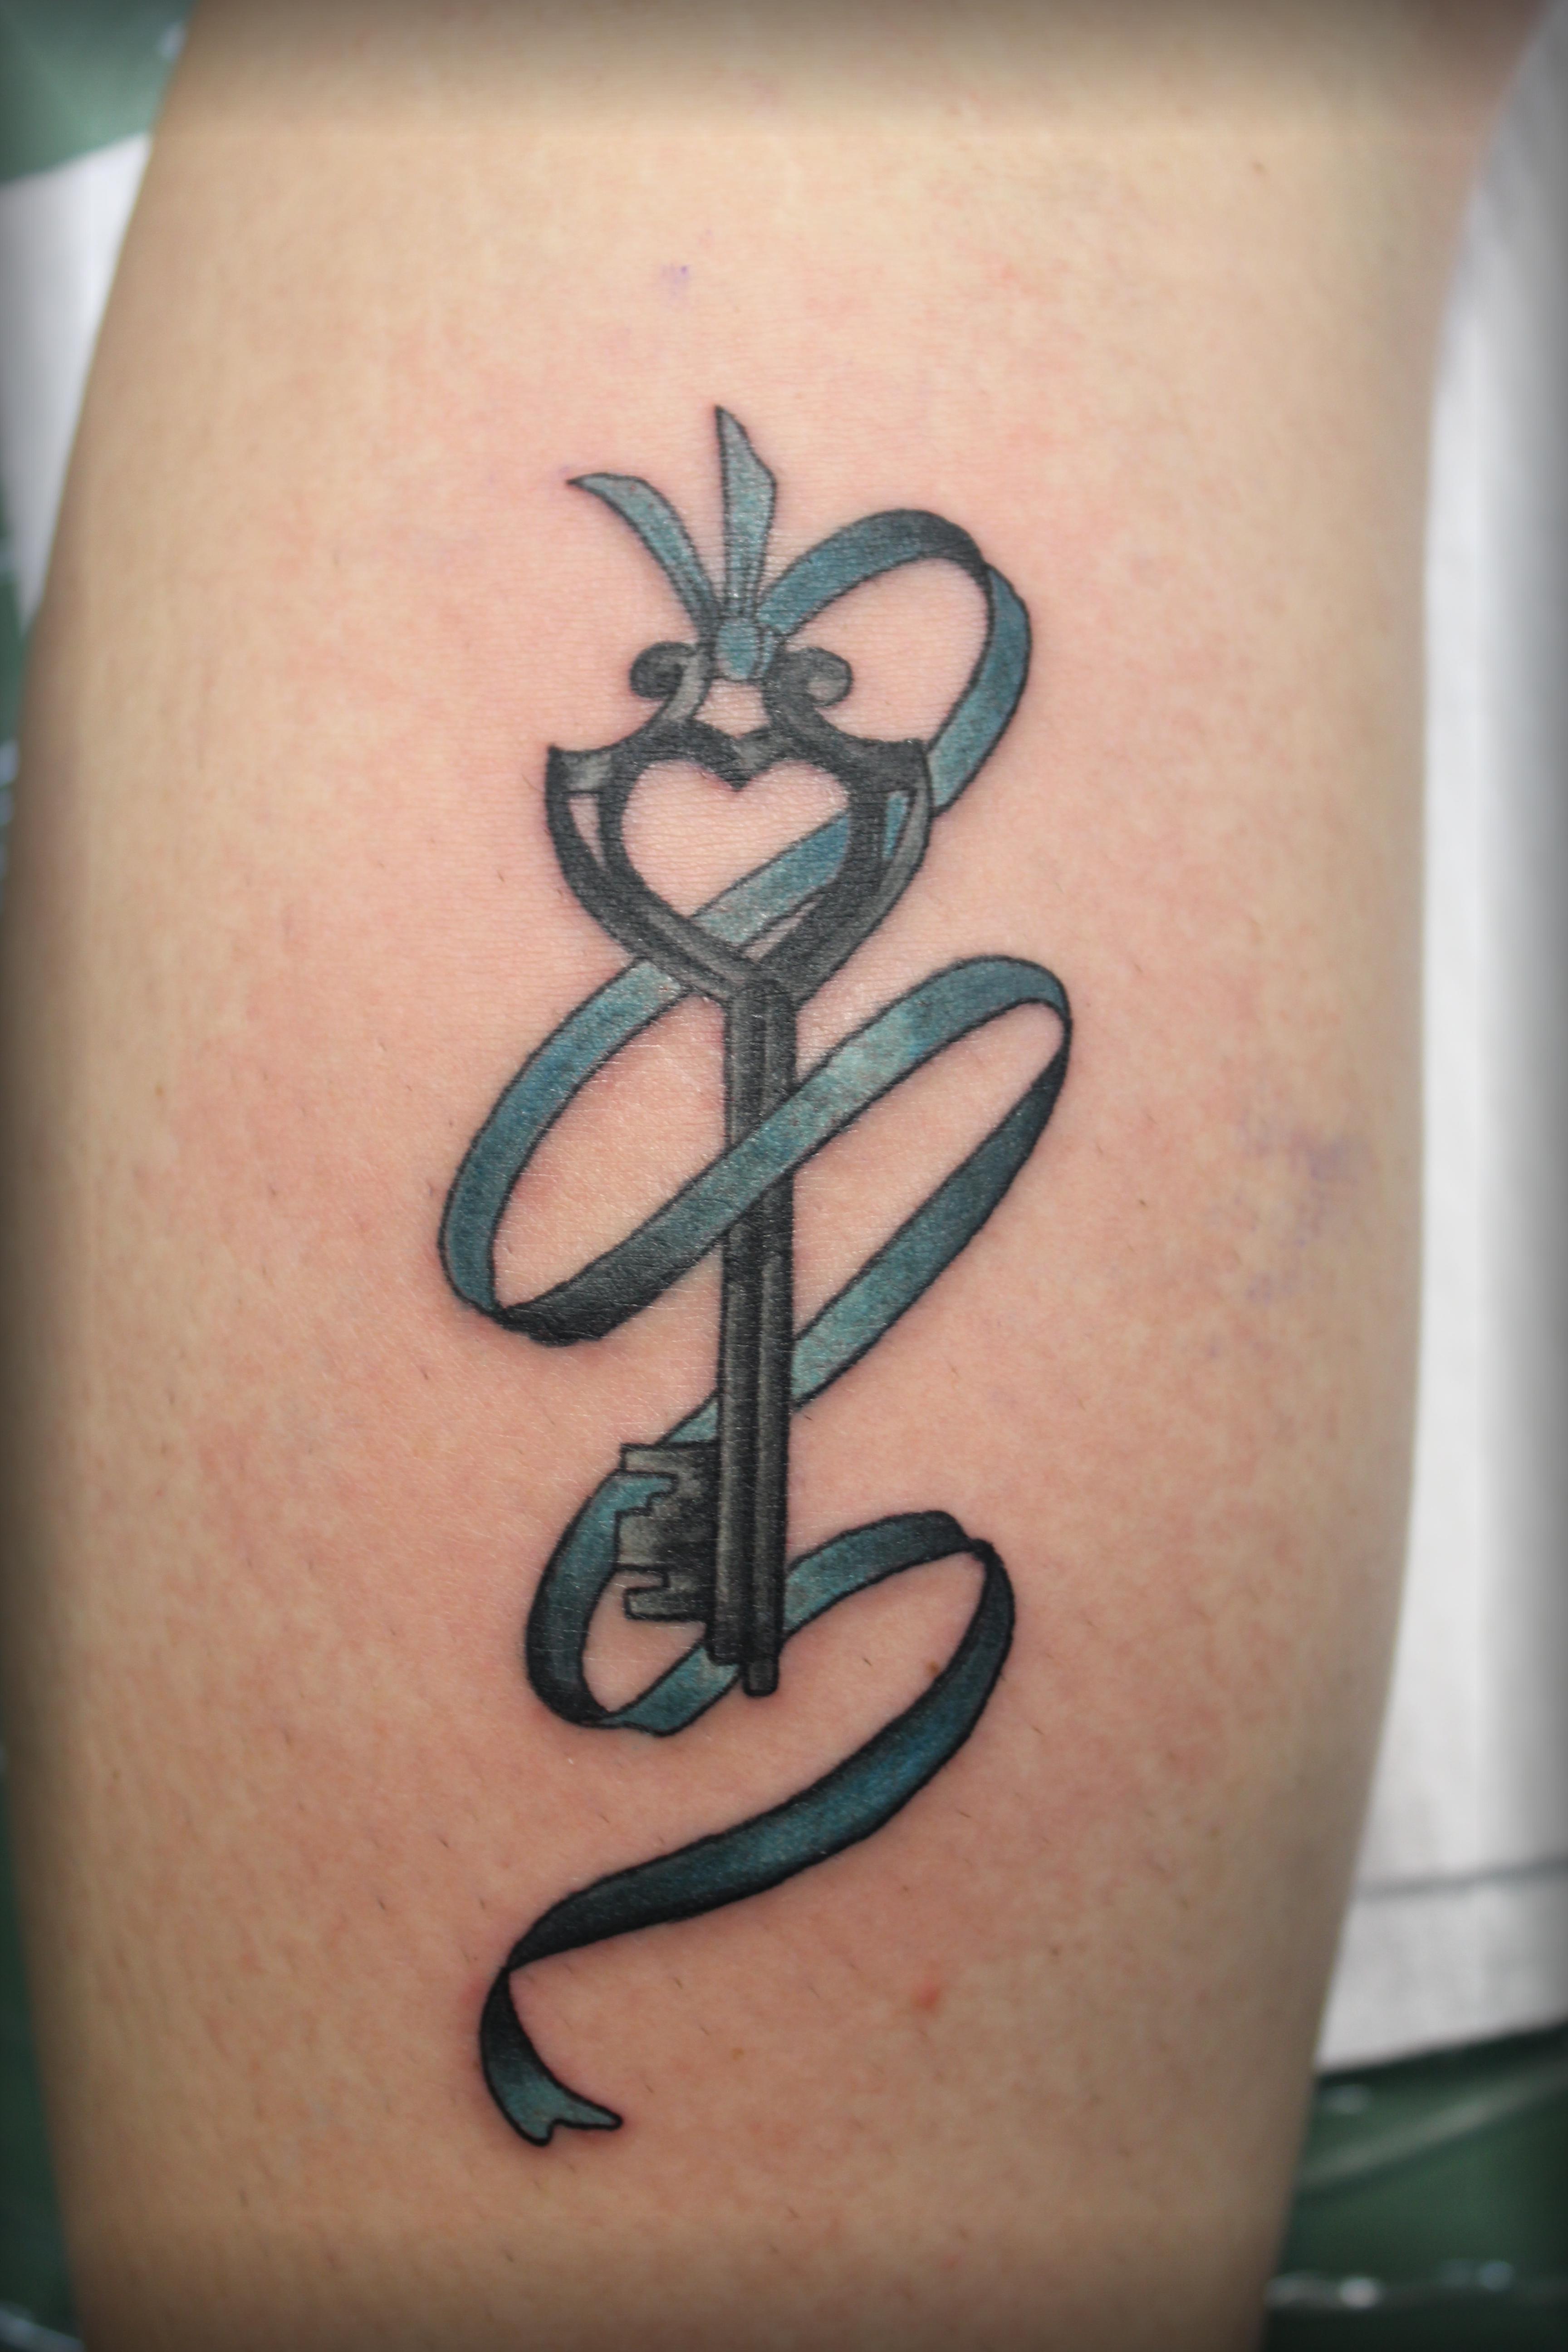 Ribbon Tattoos Designs, Ideas and Meaning | Tattoos For You